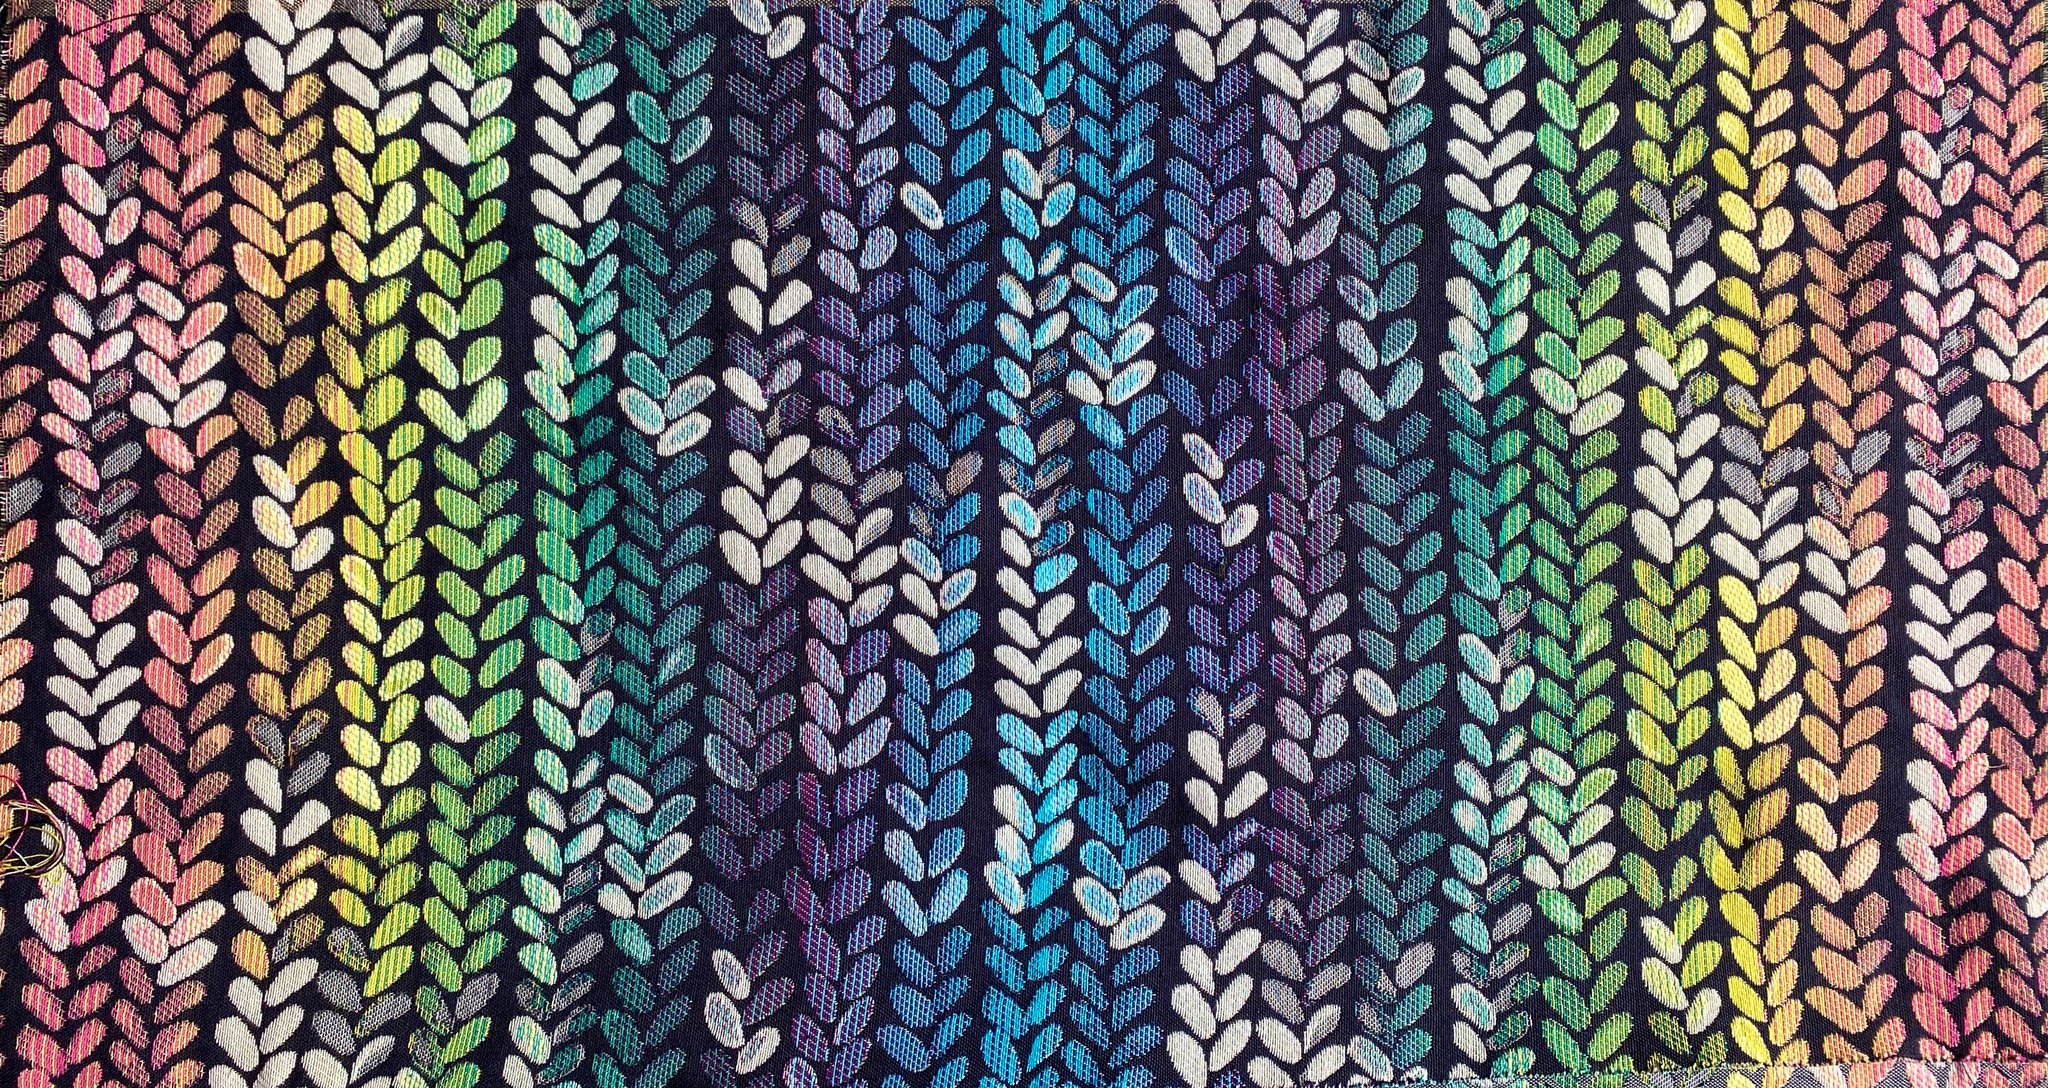 Woven Wings Knitwear Heroes, Just for one day...  Image